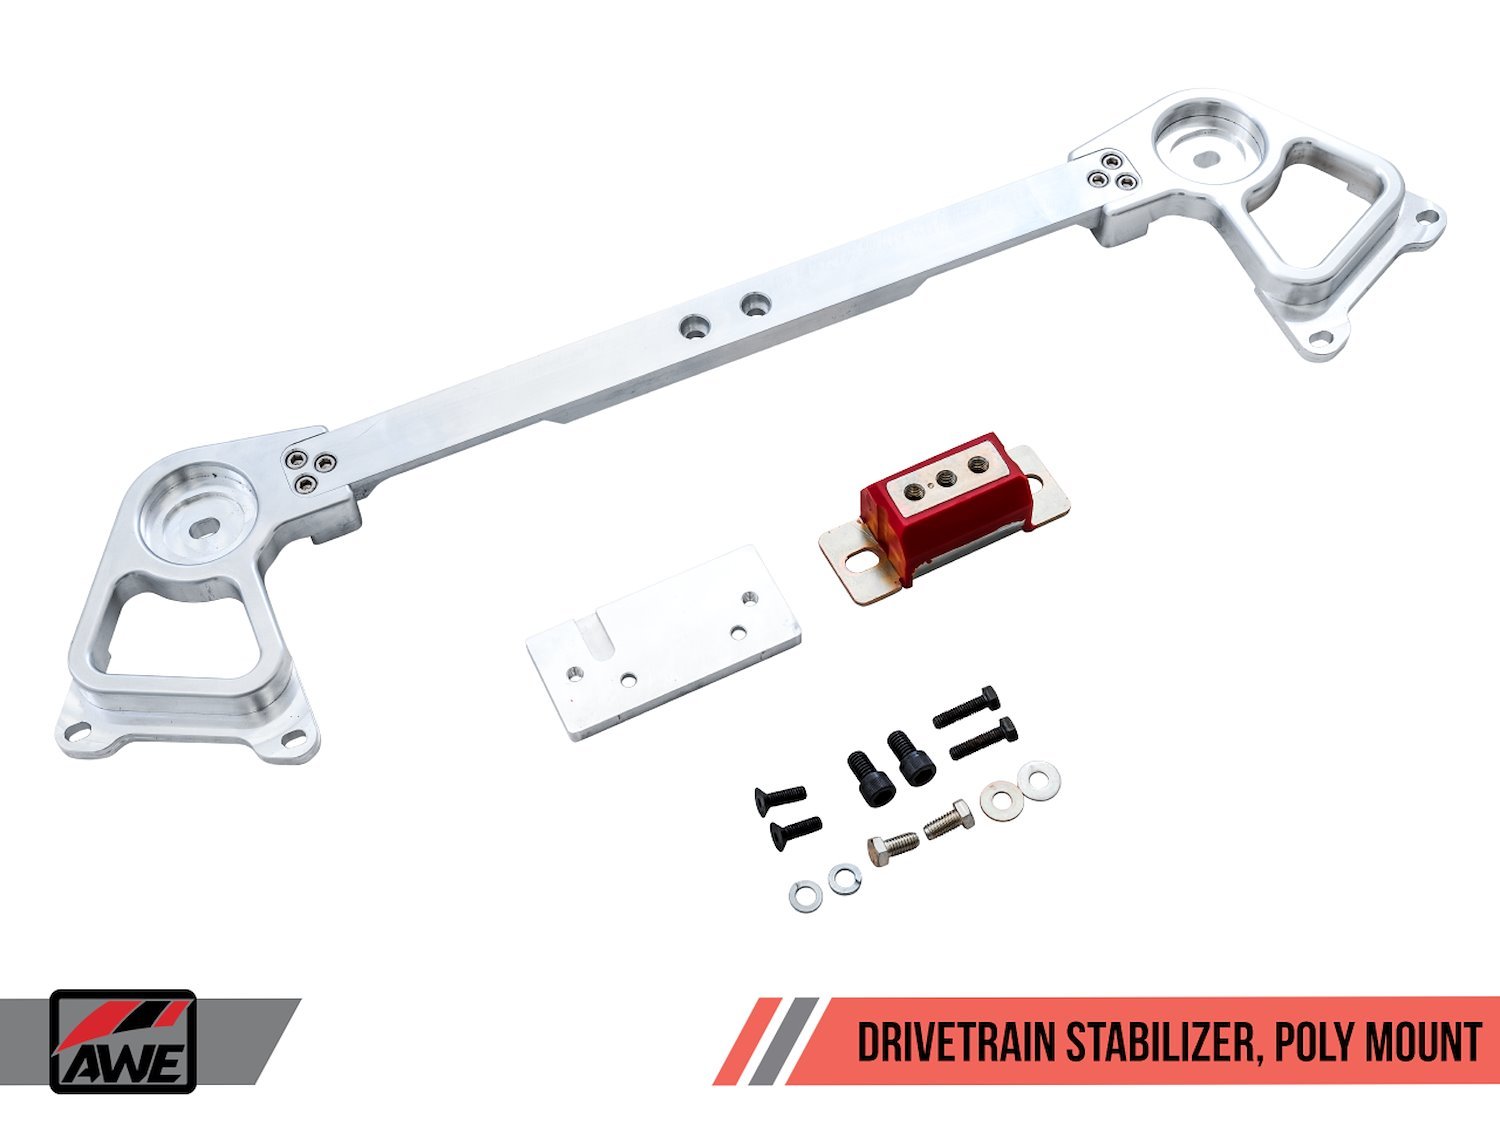 Drivetrain Stabilizer with Poly Mount, for Manual Transmission